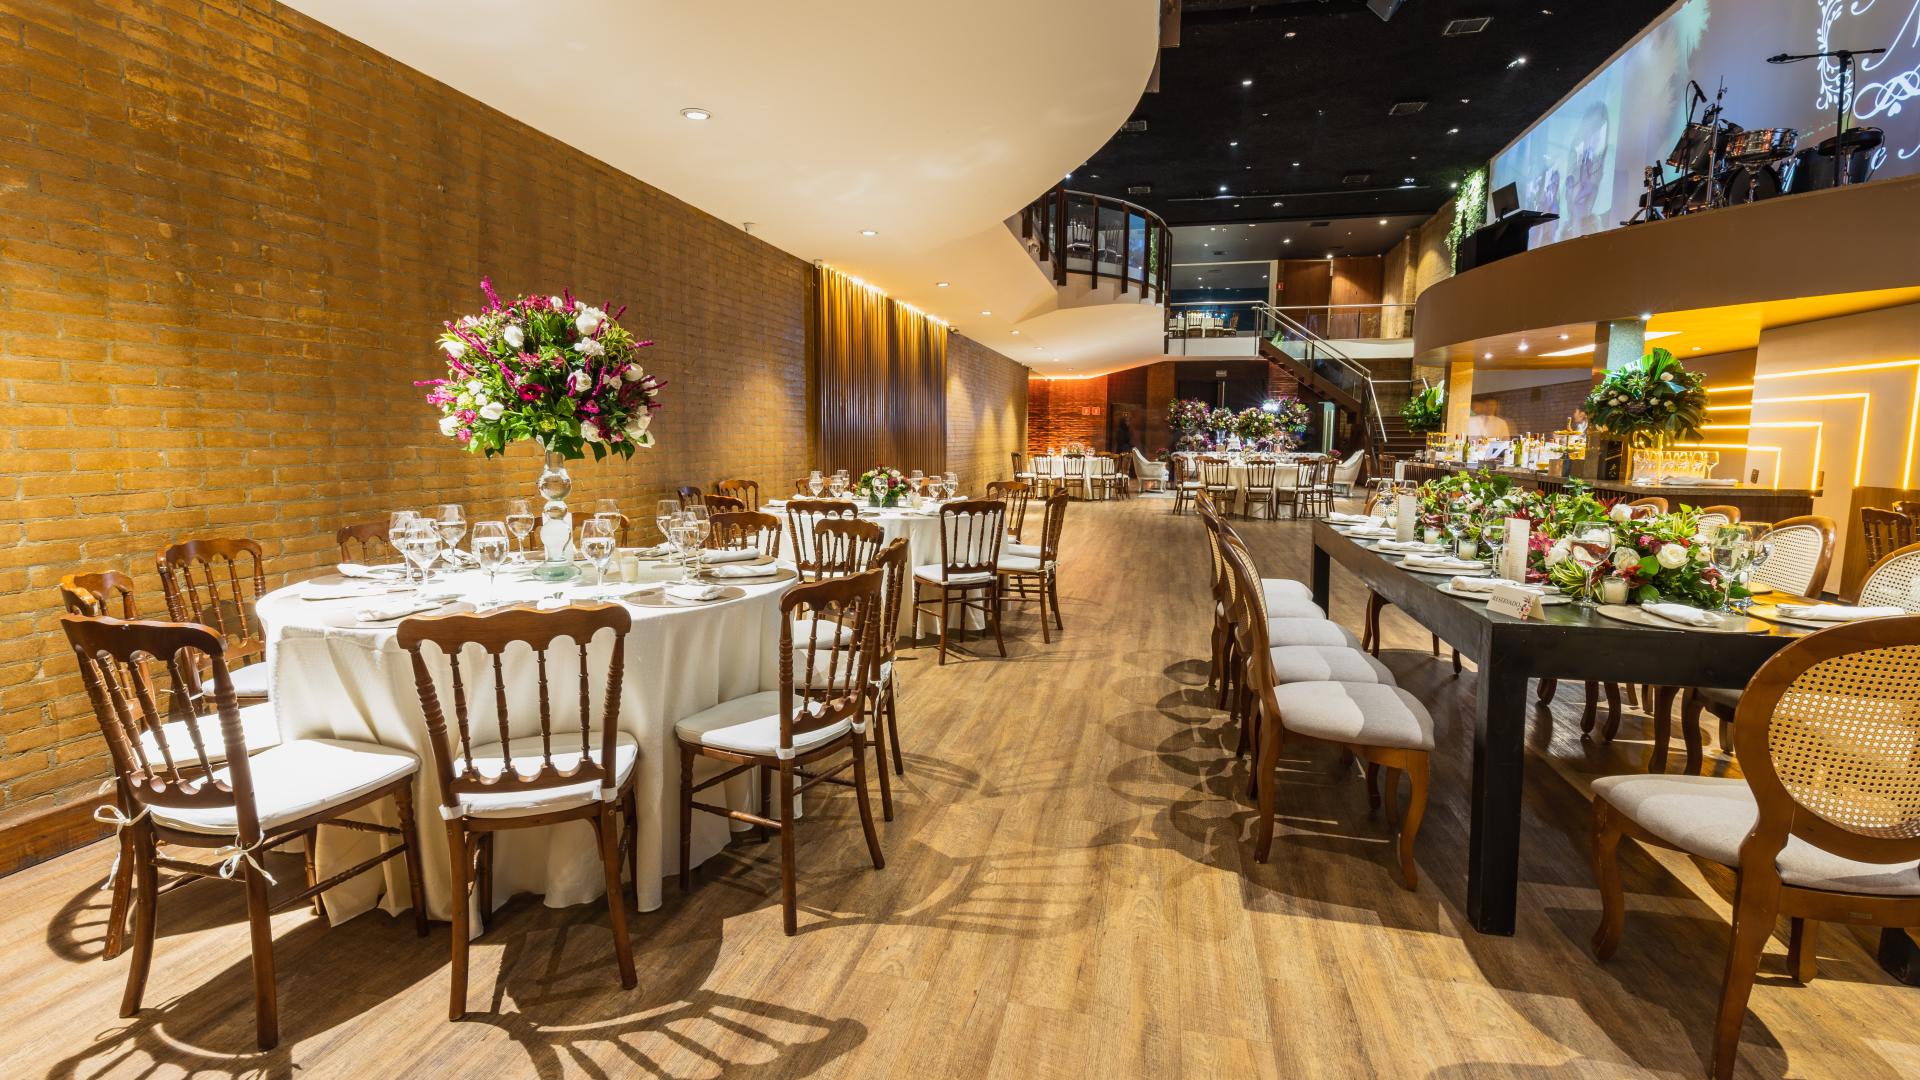 Winter Wedding Venues for Rent in New York City, NY